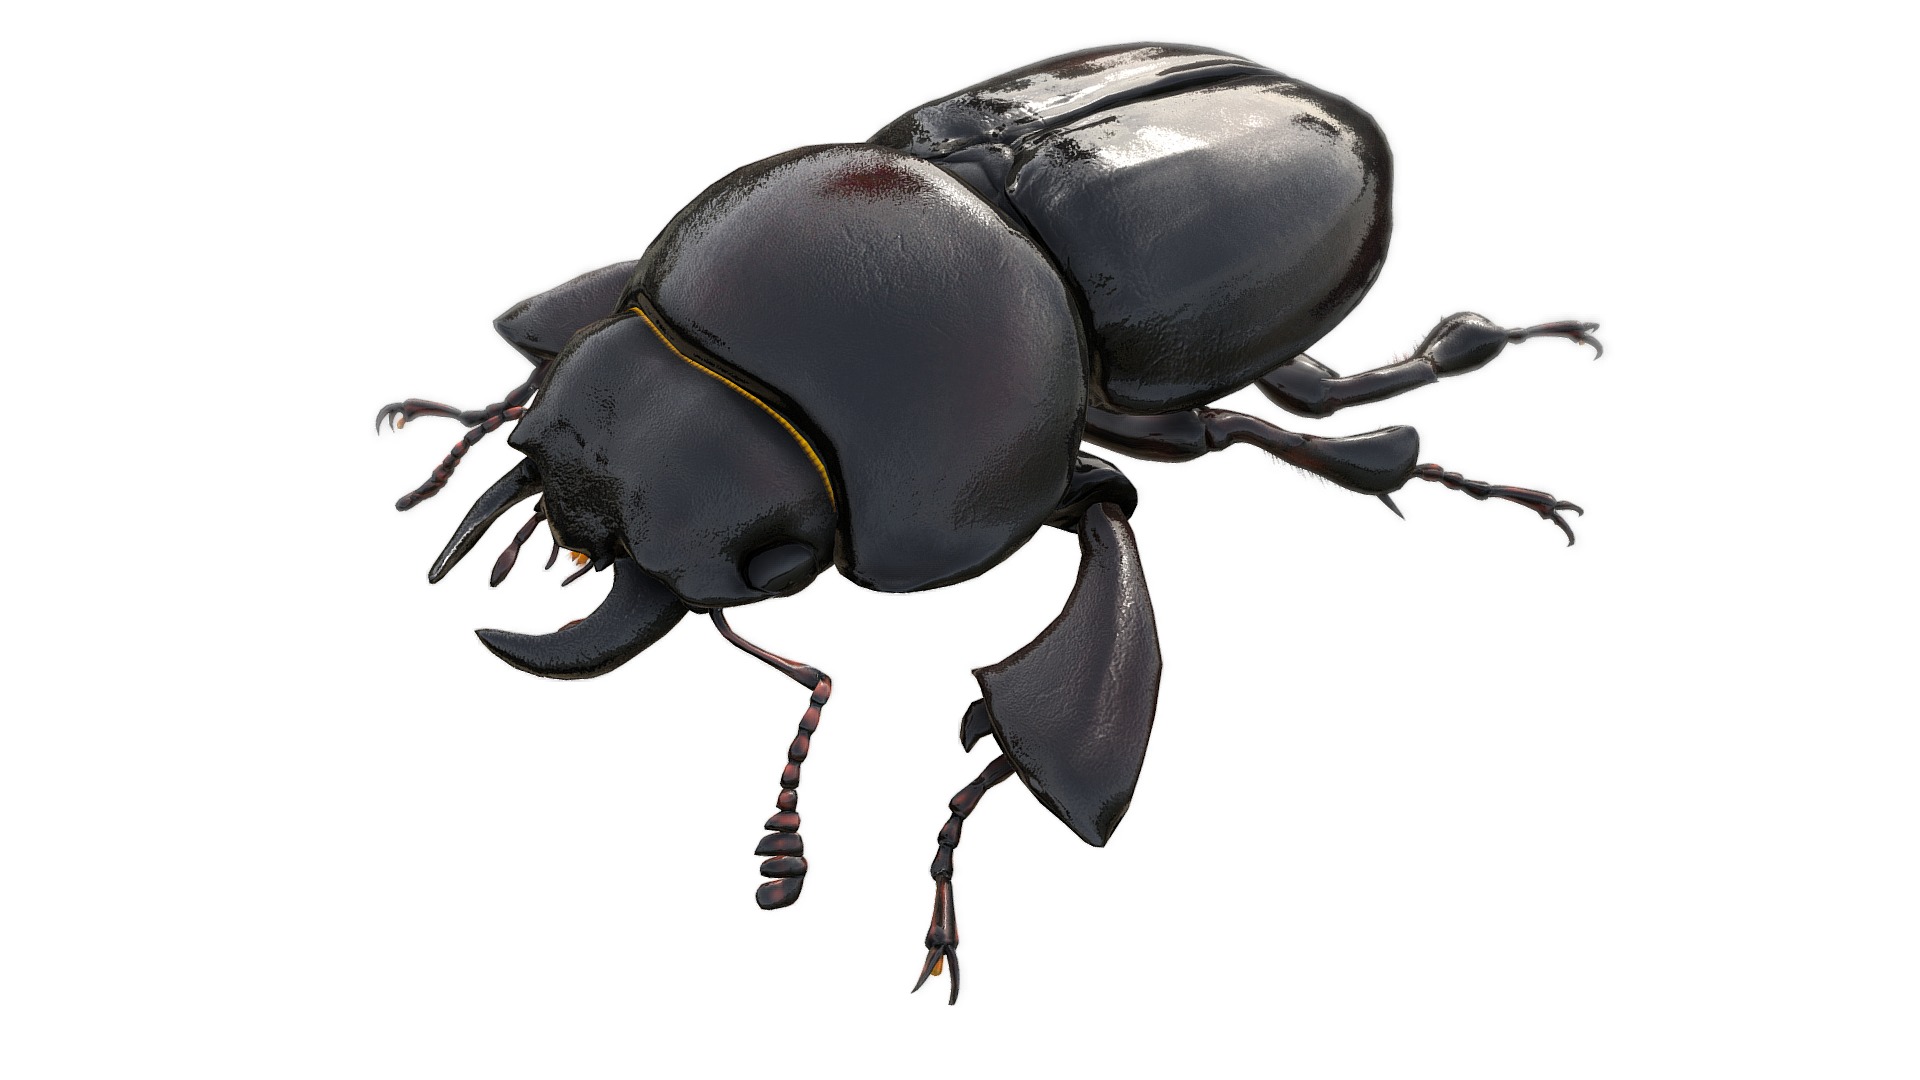 3D model Apterocyclus honoluluensis - This is a 3D model of the Apterocyclus honoluluensis. The 3D model is about a black and yellow beetle.